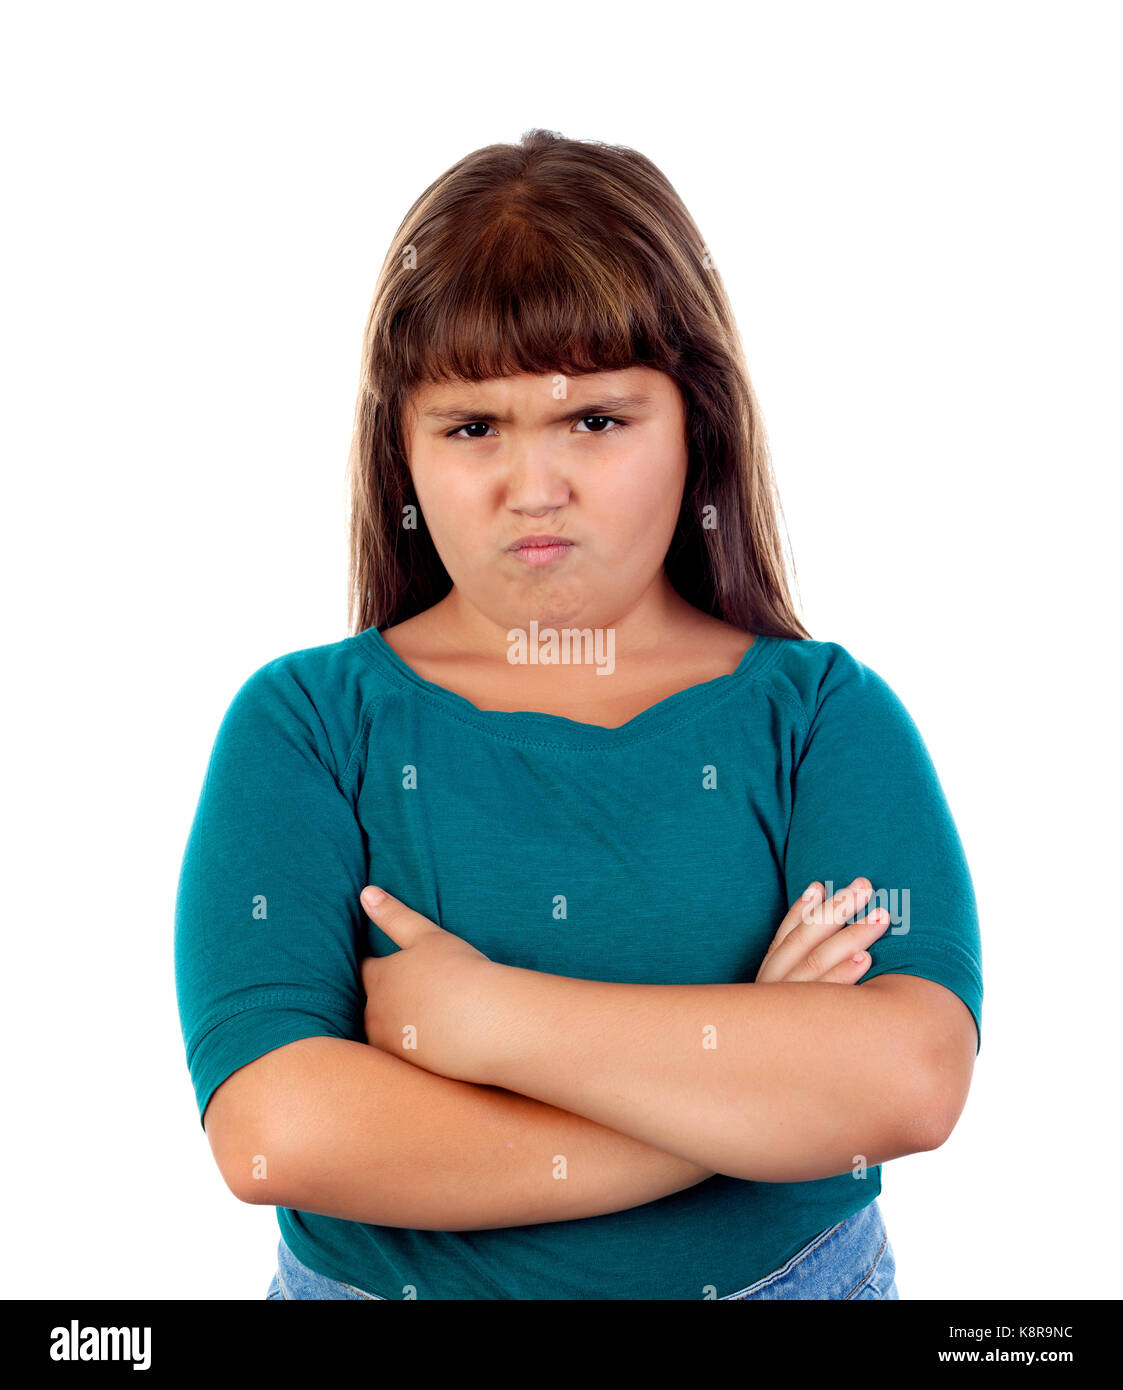 Angry girl isolated on a white background Stock Photo